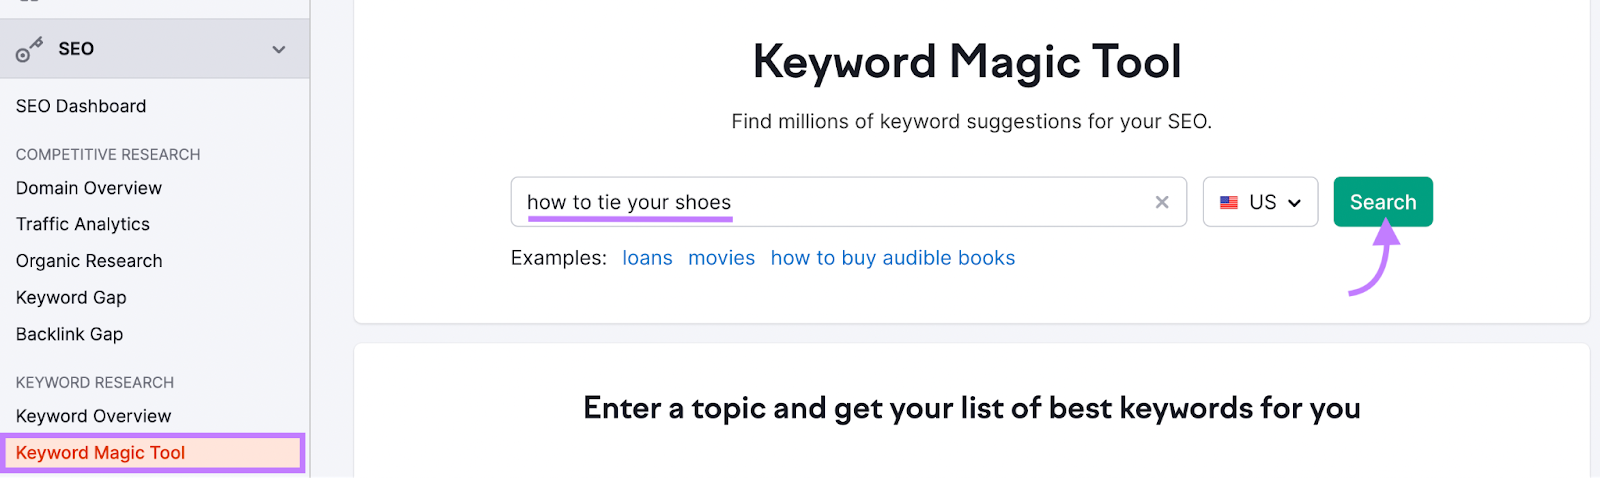 "how to tie your shoes" entered into Keyword Magic Tool search bar